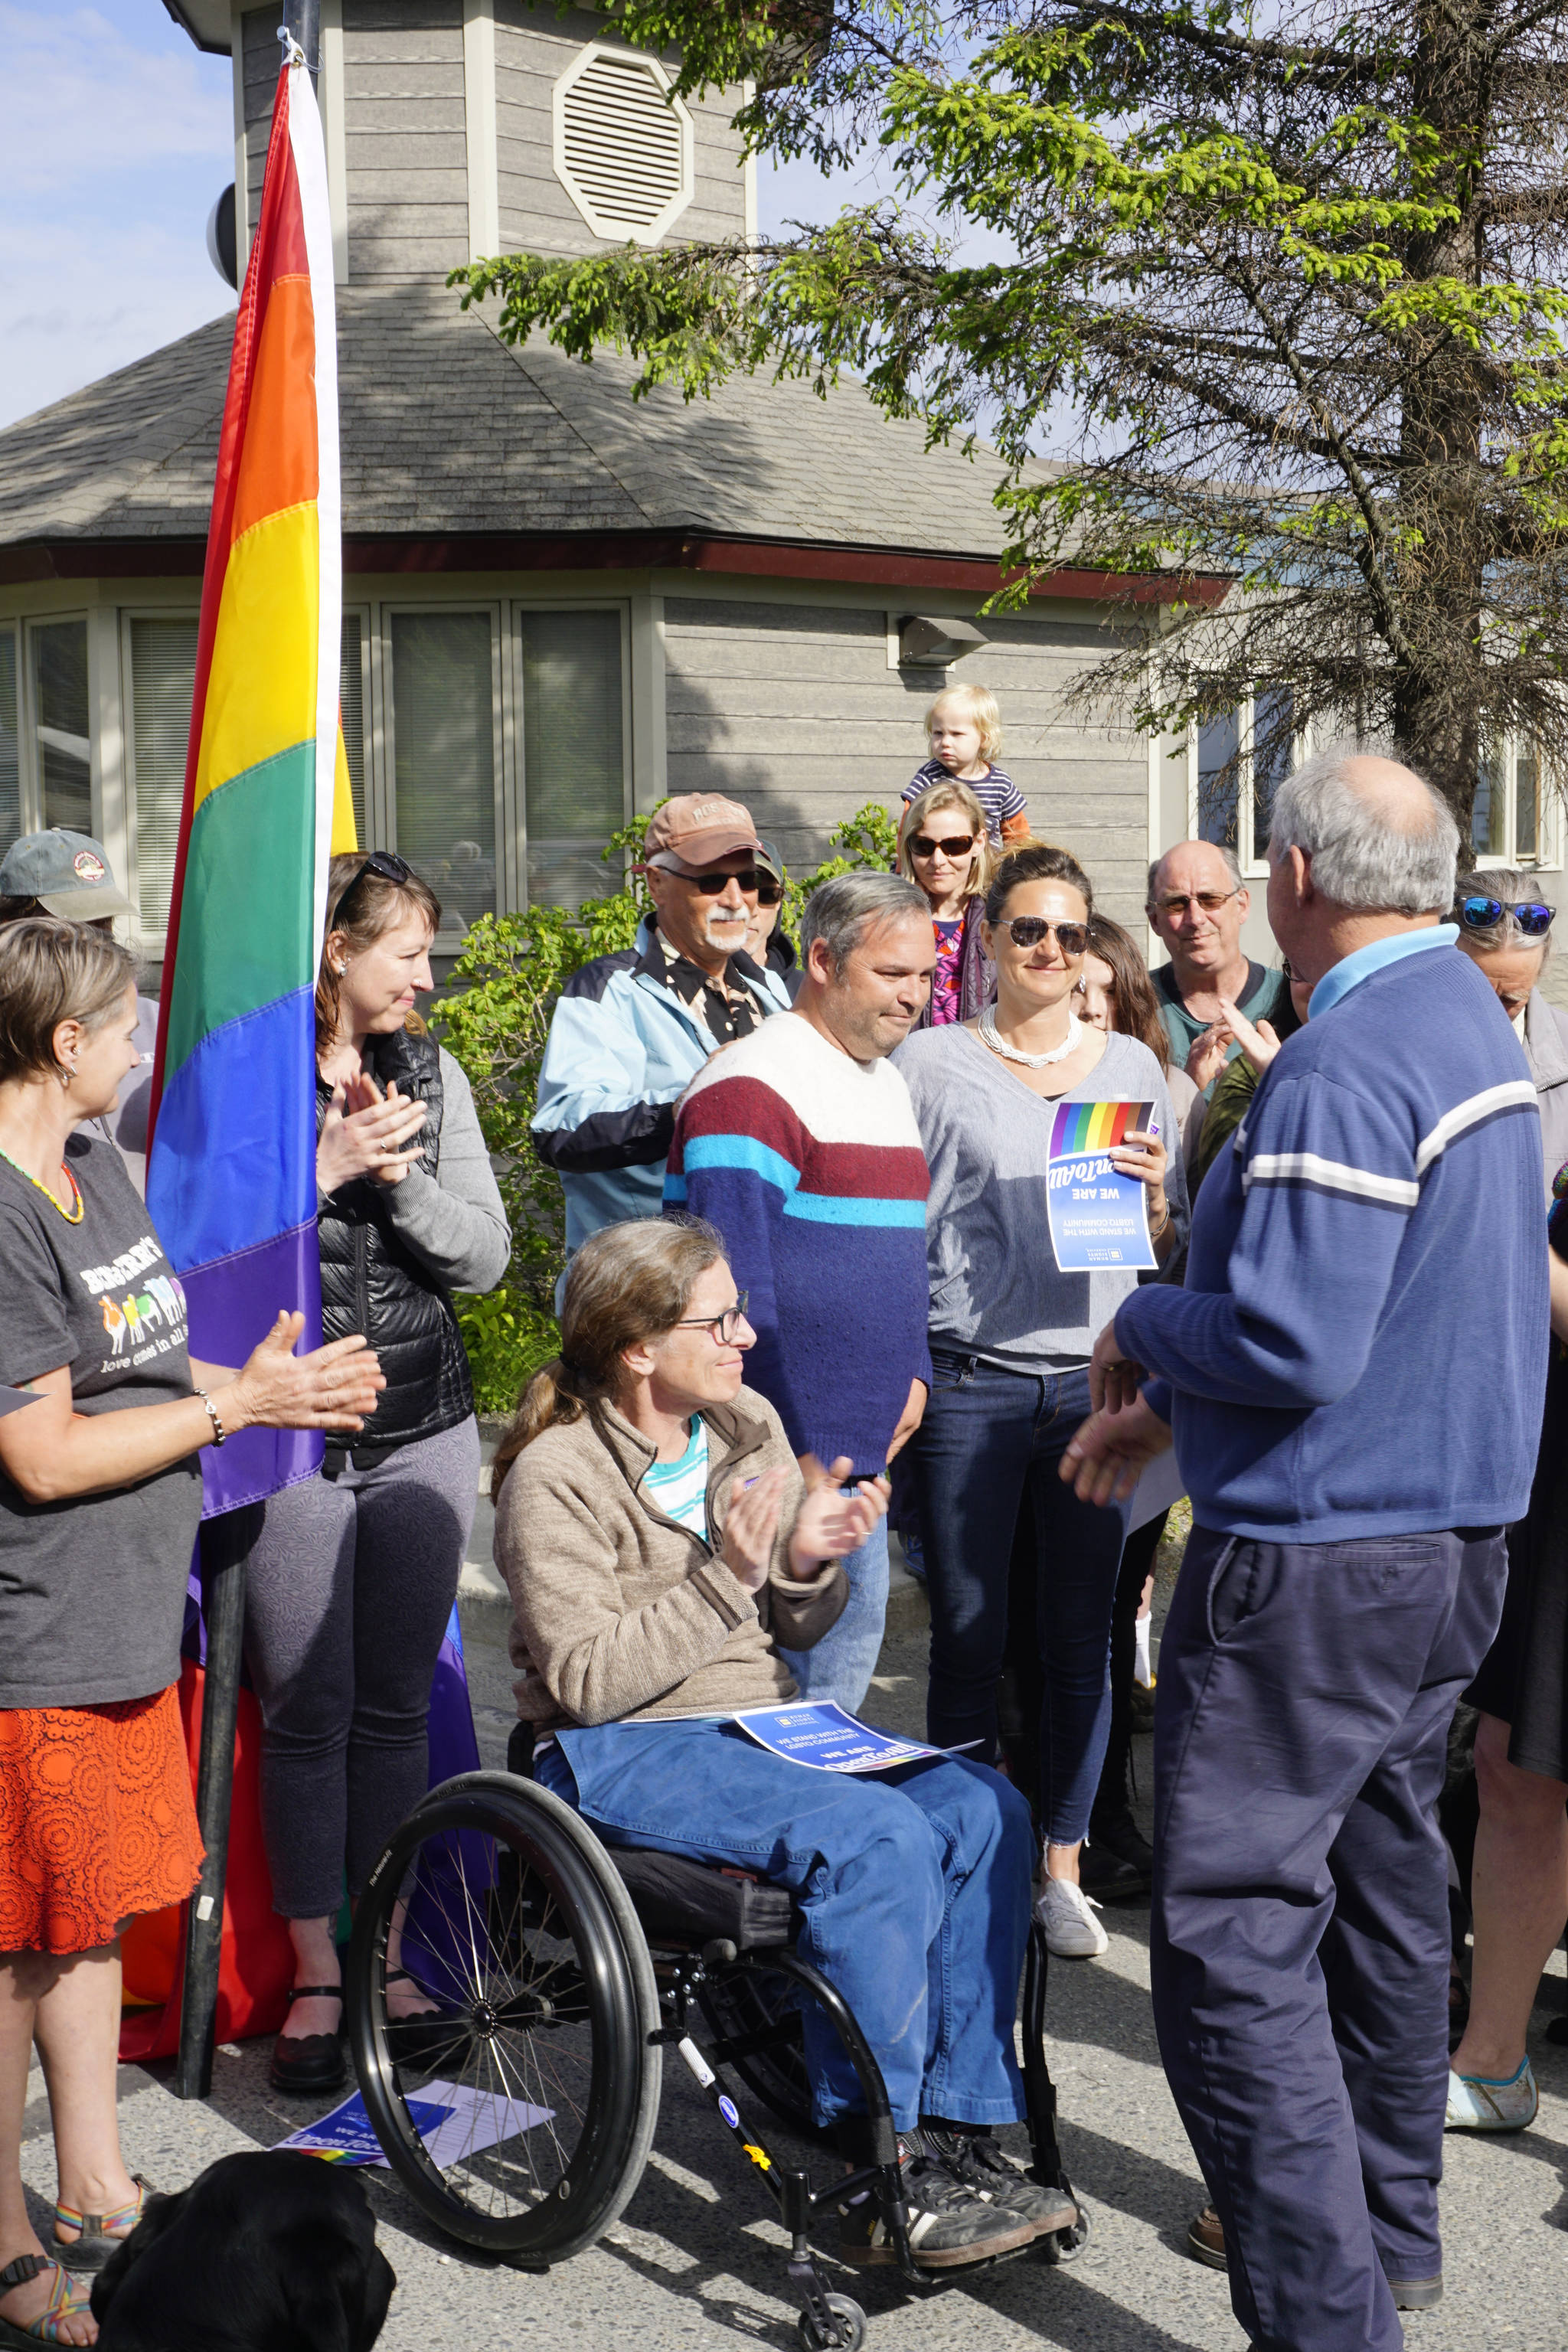 Homer Mayor Bryan Zak greets people after reading a Mayoral Recognition recognizing June as Homer Pride Month at about 6 p.m. Monday, June 11, 2018 outside Homer City Hall in Homer, Alaska. A crowd of about 75 people attended in support of Pride Month. Council members Shelly Erickson, Heath Smith and Thomas Stroozas notified the city clerk that they would not attend the June 11 meeting, forcing its cancellation because of lack of a quorum. (Photo by Michael Armstrong/Homer News)